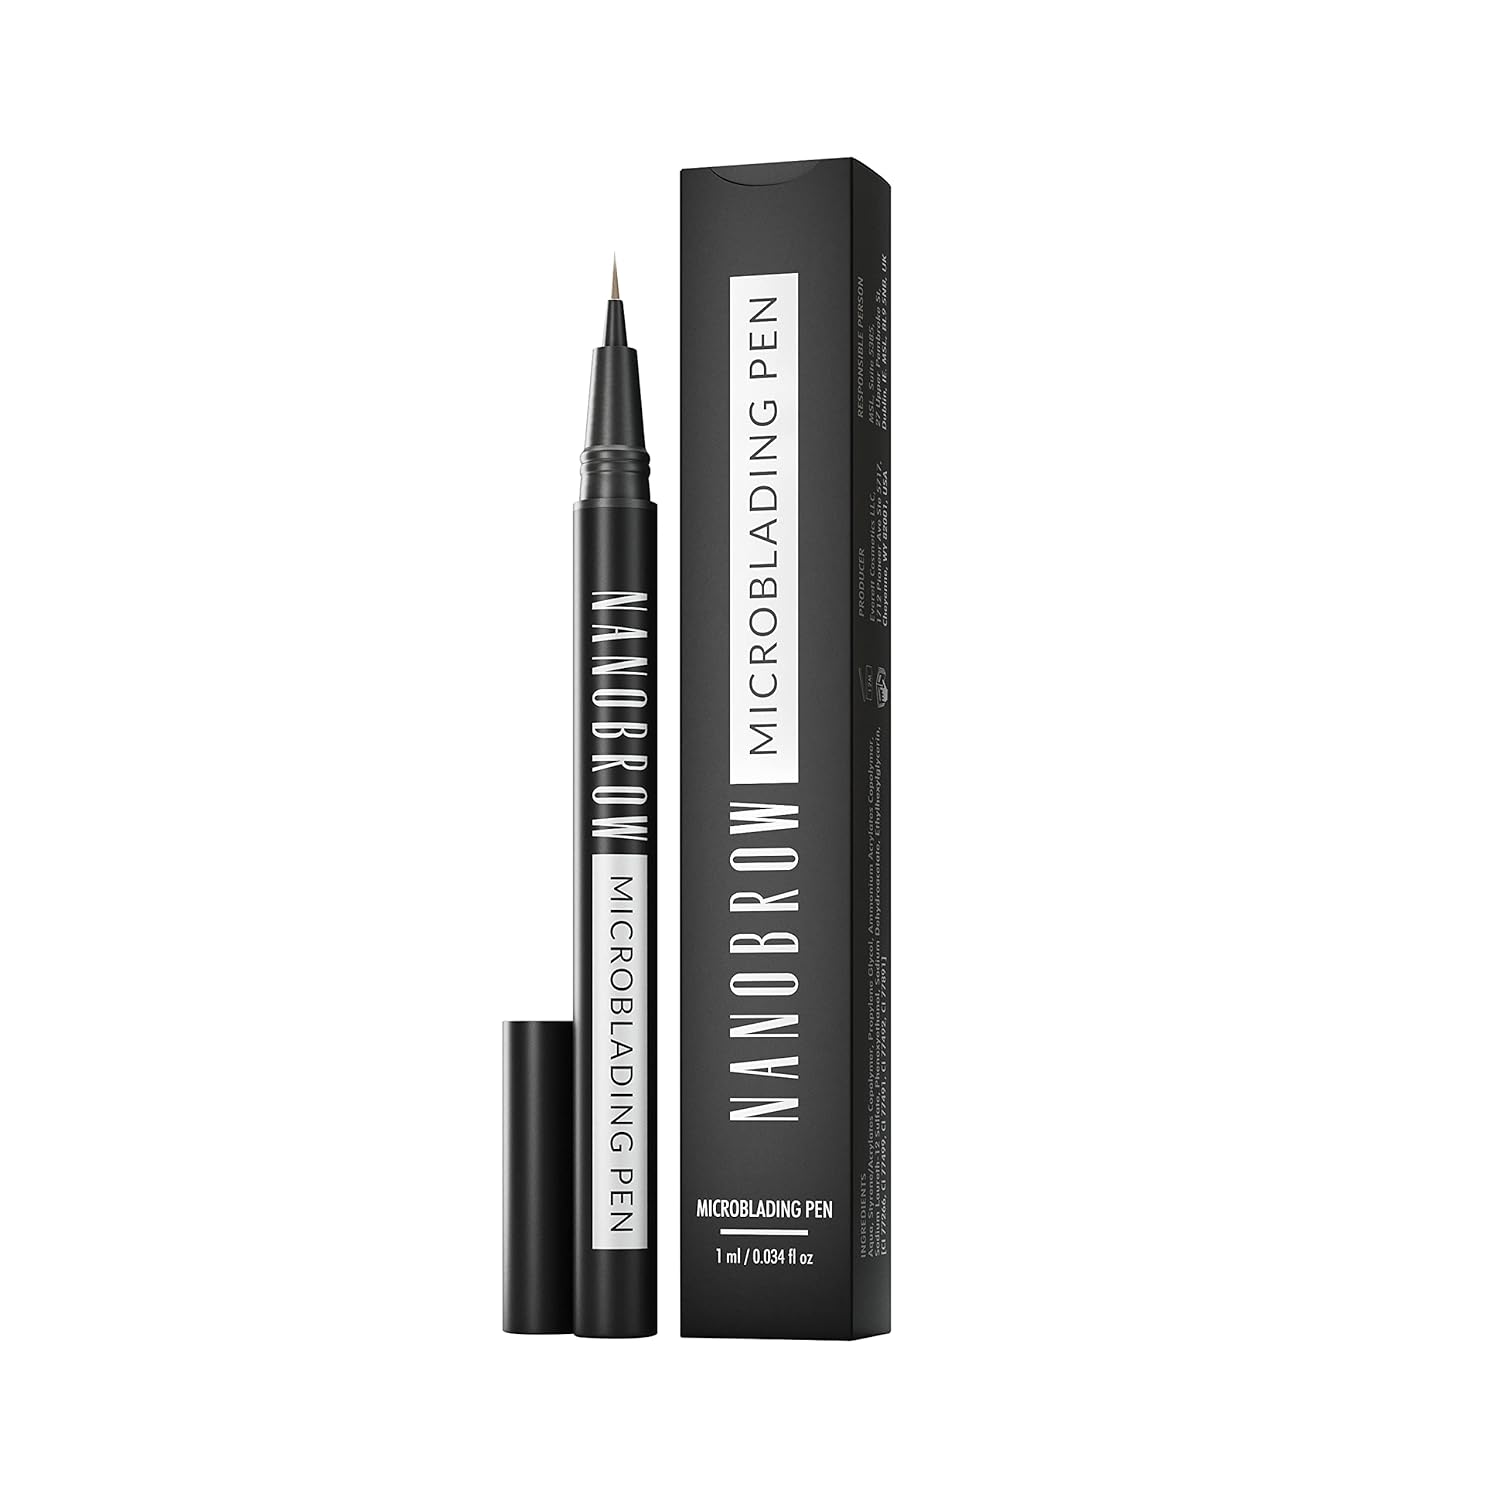 Nanobrow Microblading Pen Warm Brown - Enhancing, Thickening, Eyebrow Filling. Brow pen with ultra-thin tip